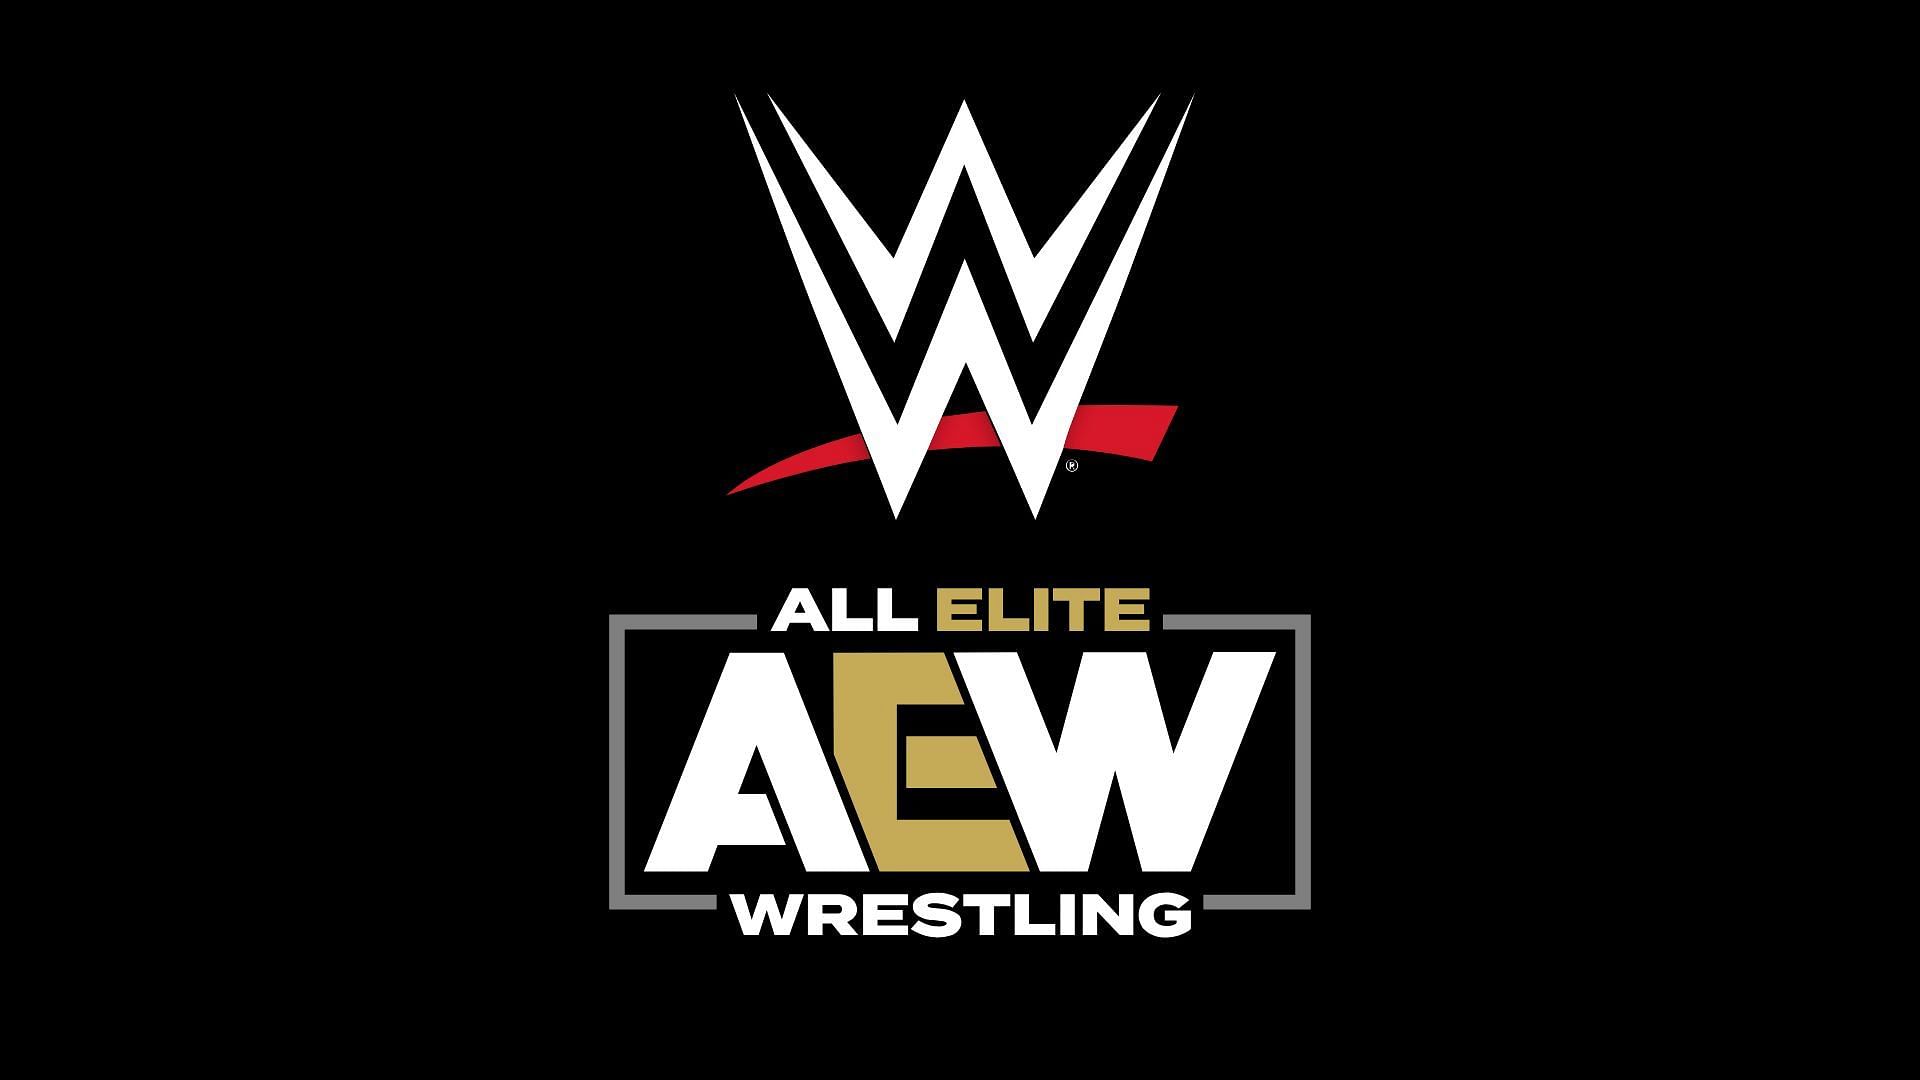 A free agent has garnered interest from WWE and AEW